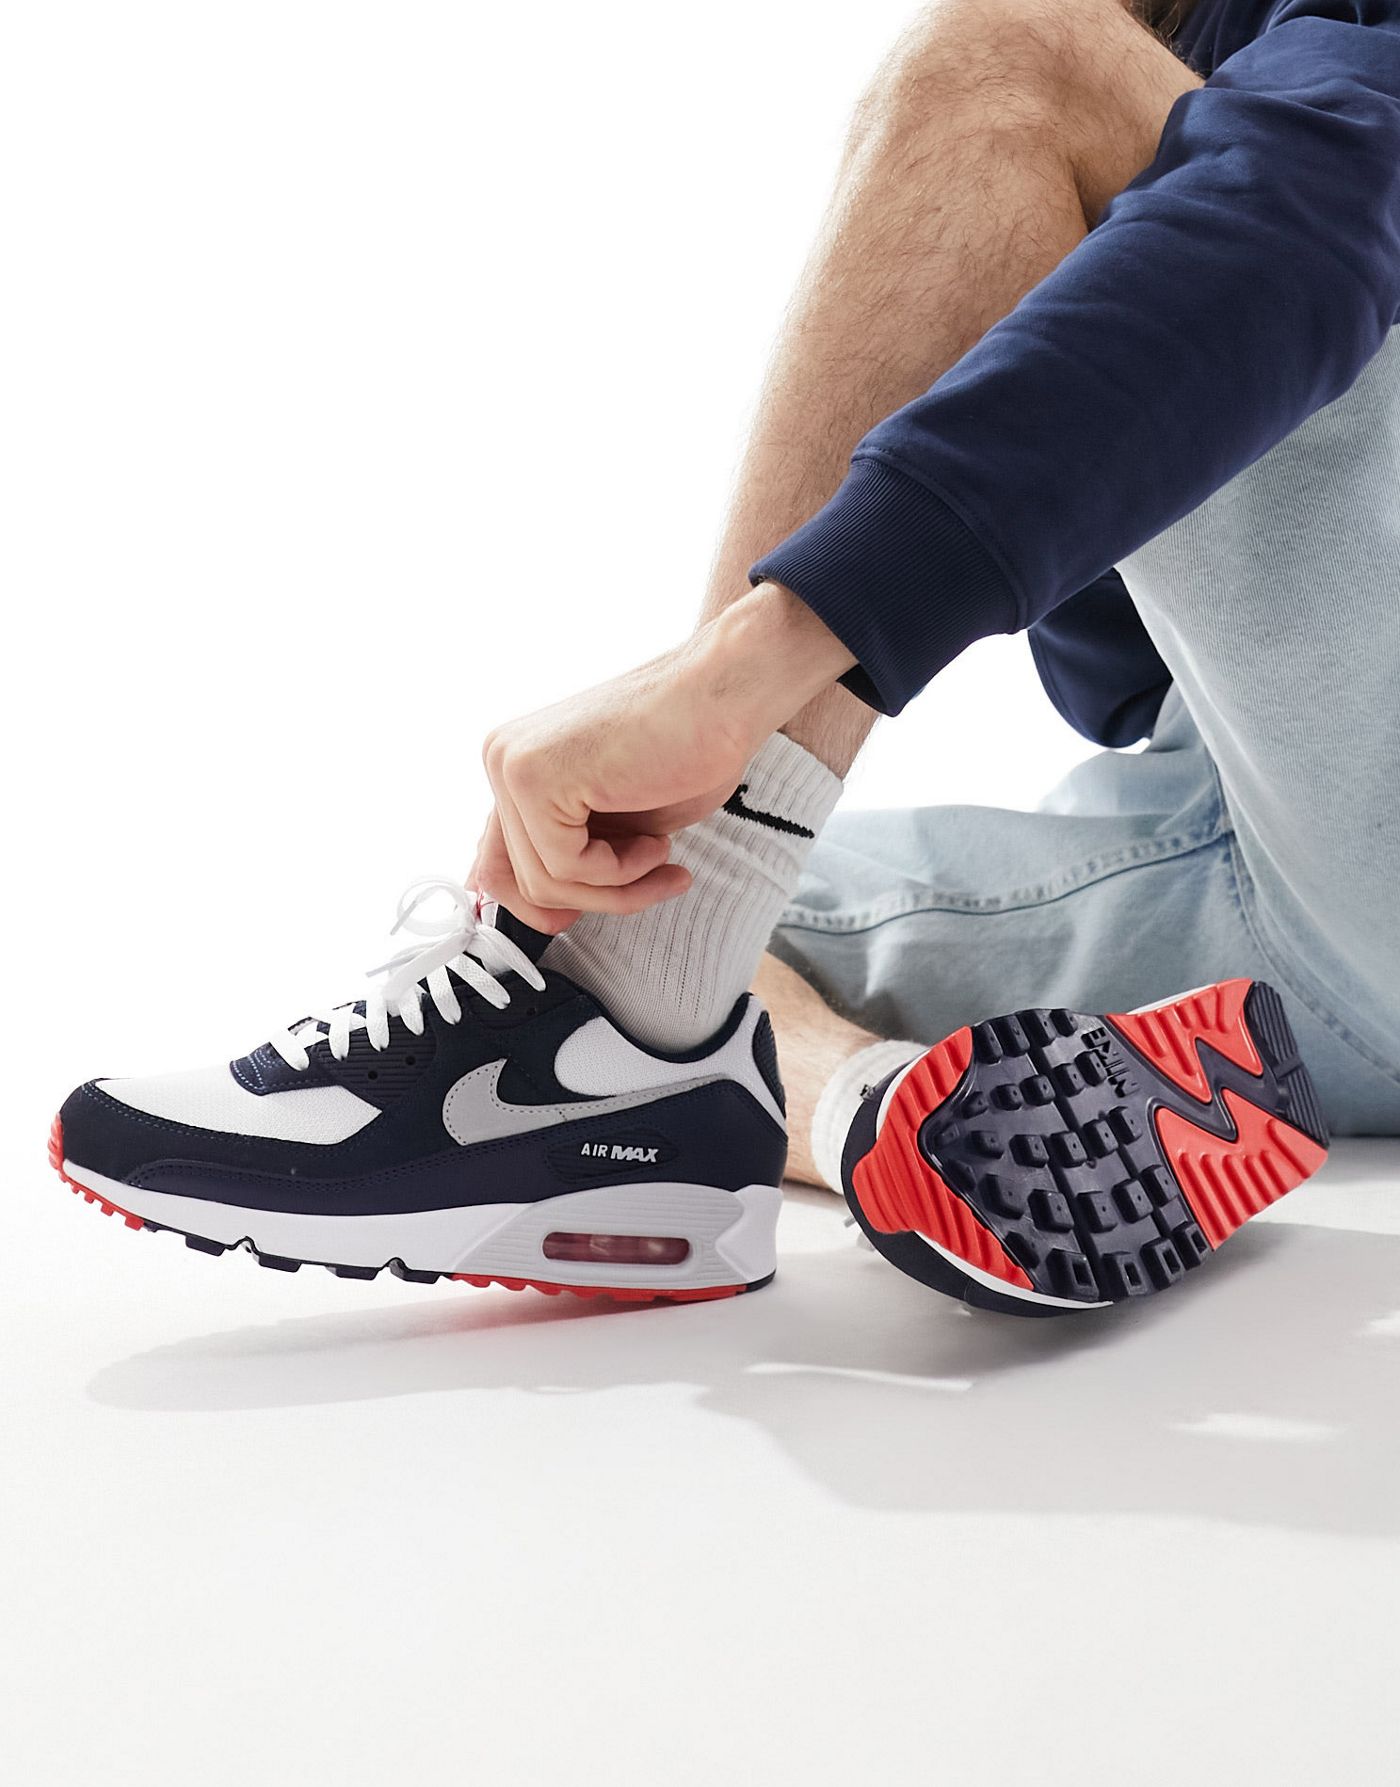 Nike Air Max 90 trainers in navy, white and red